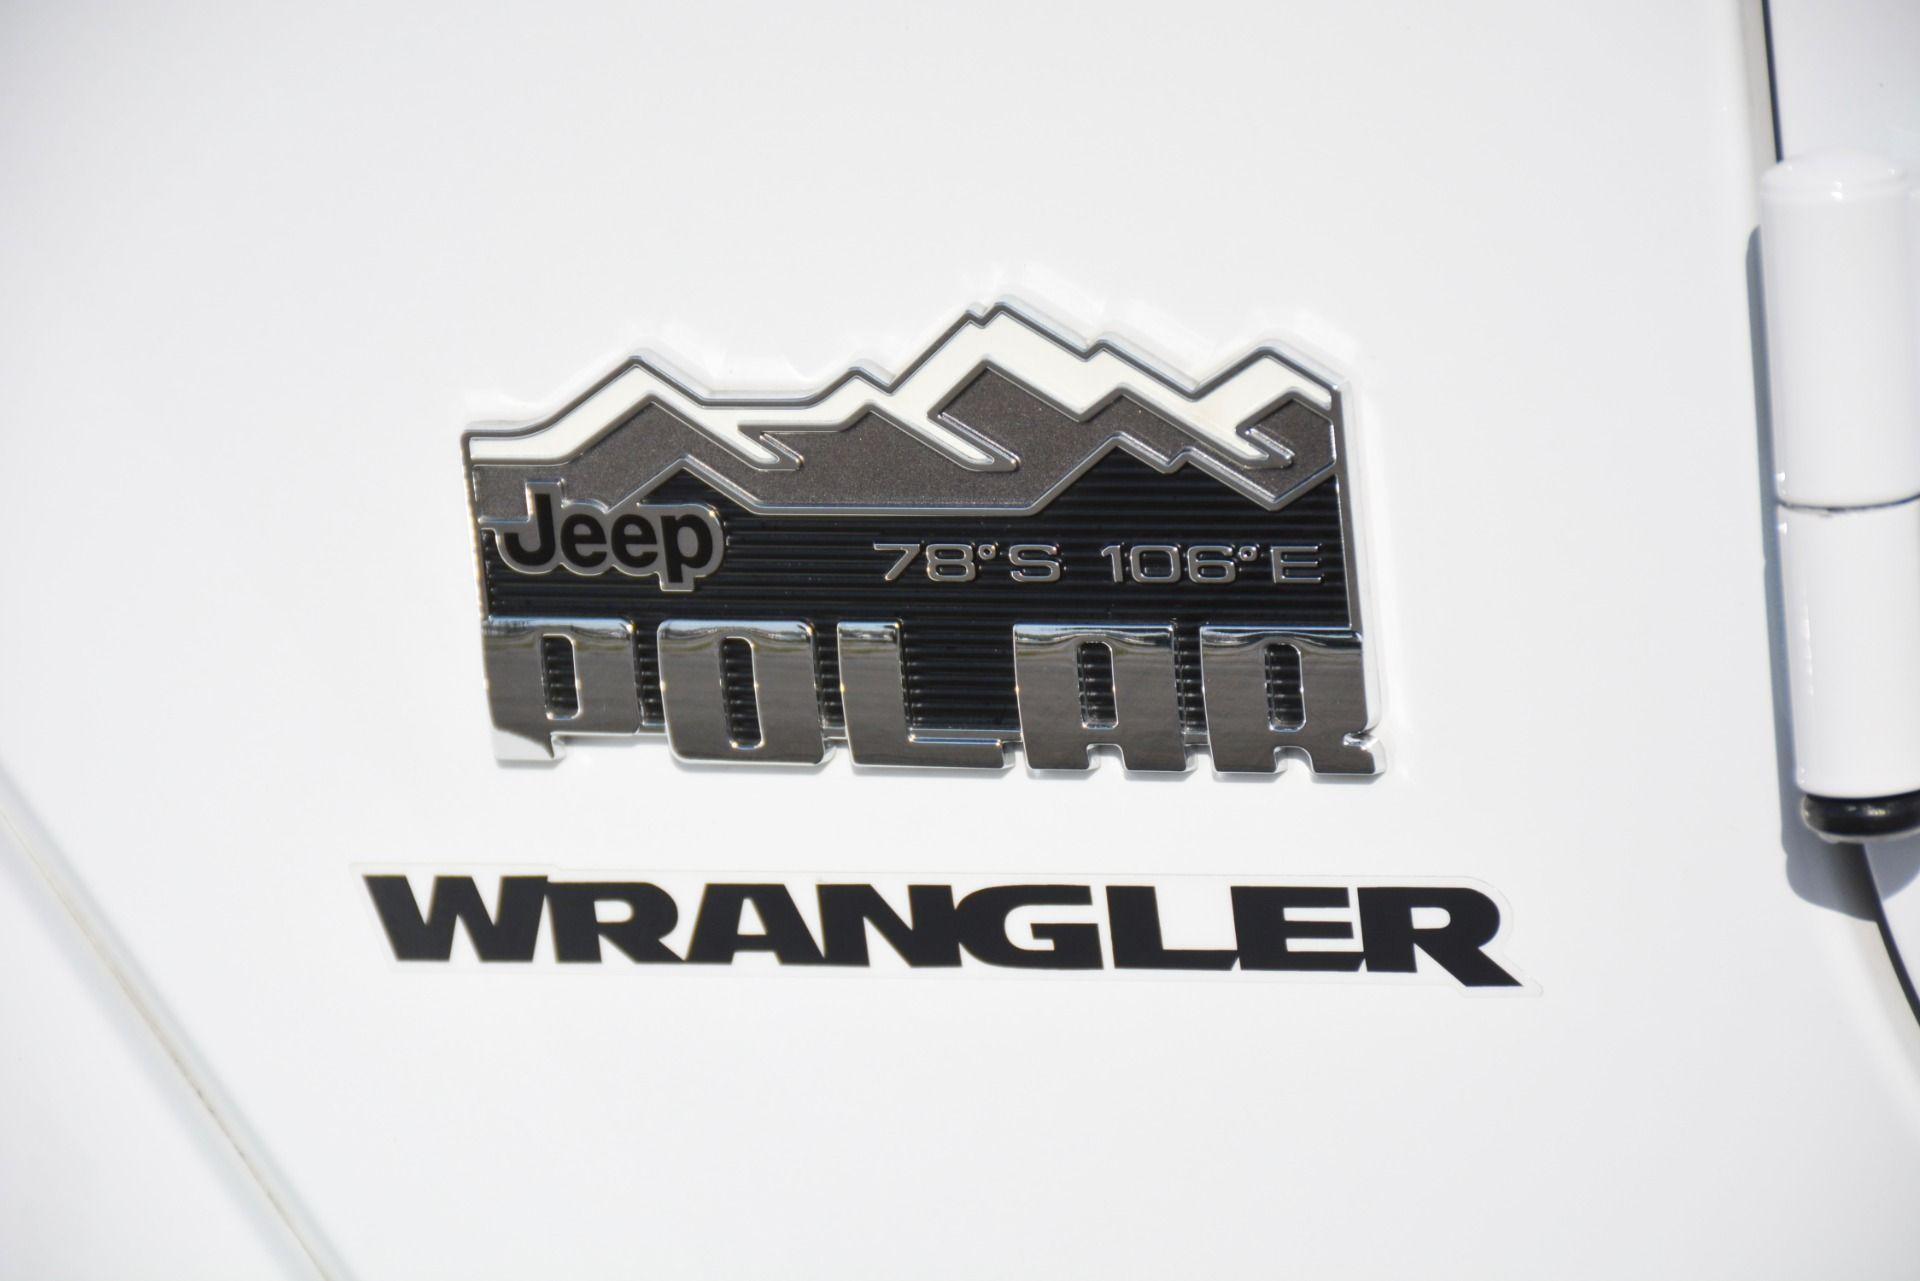 Jeep Wrangler Unlimited Logo - Used 2014 Jeep Wrangler Unlimited Polar Edition $900